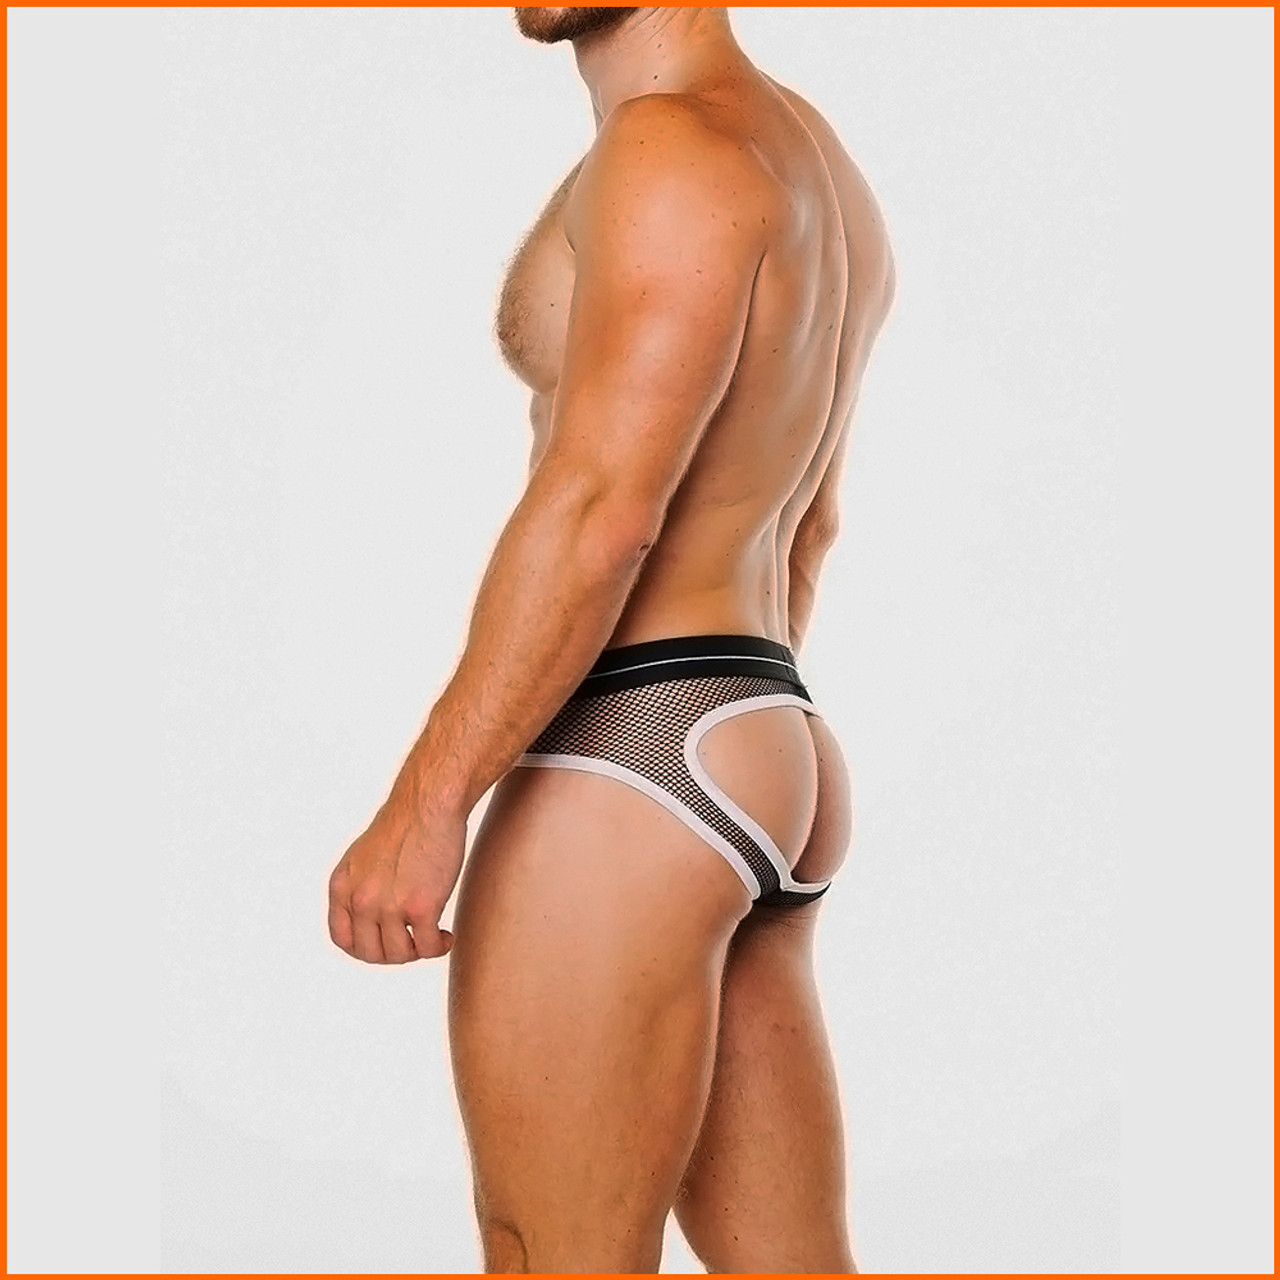 https://cdn11.bigcommerce.com/s-febfb/images/stencil/1280x1280/products/4747/52565/HC_Peep_Backless_Brief_black_profile__05897.1666046193.jpg?c=2